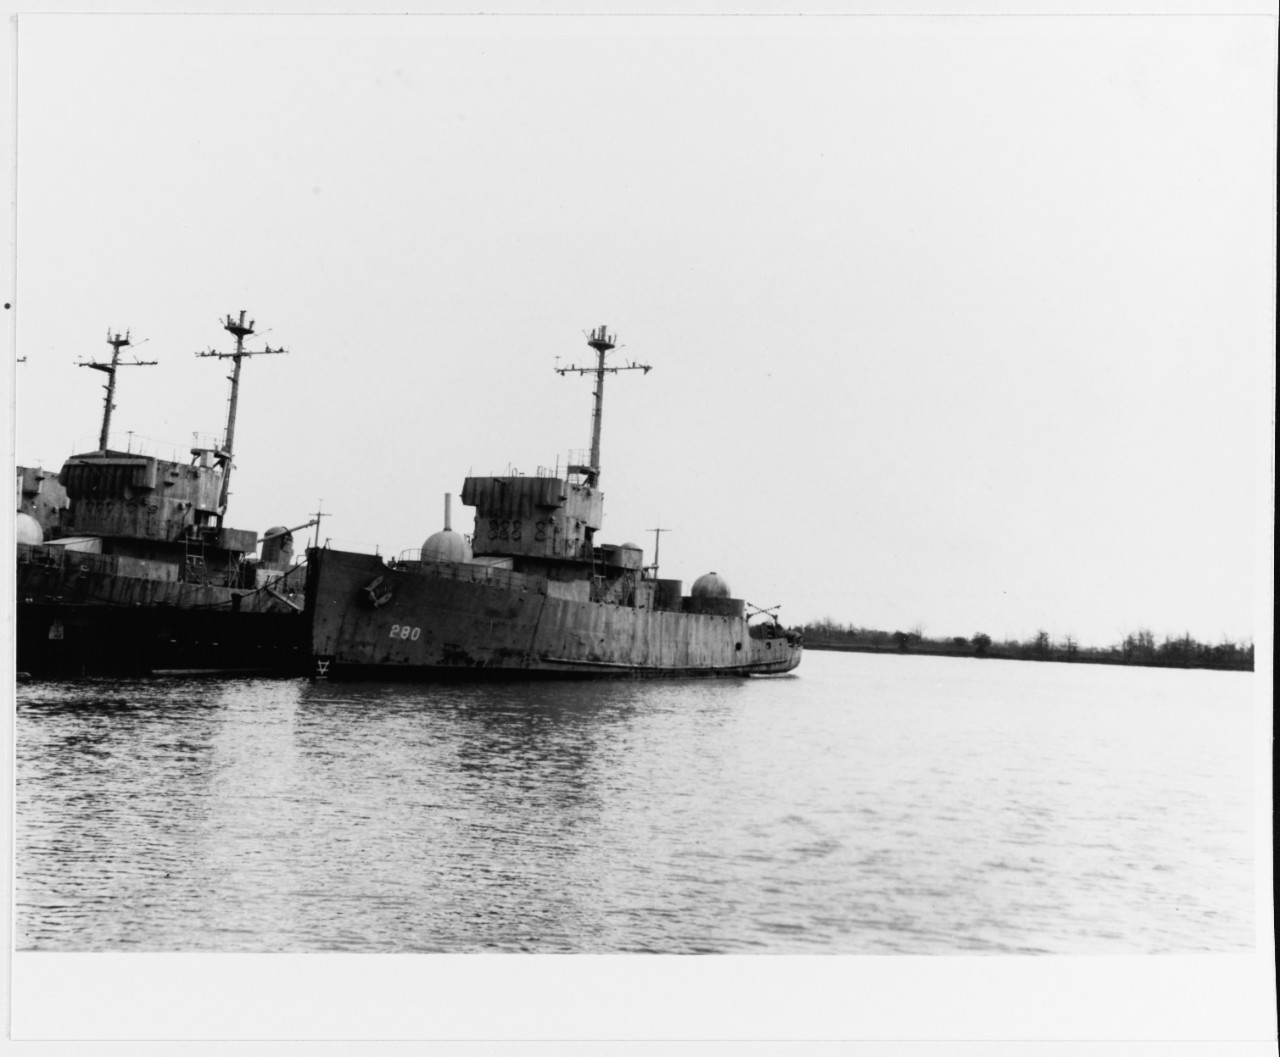 USS PROWESS (AM-280)